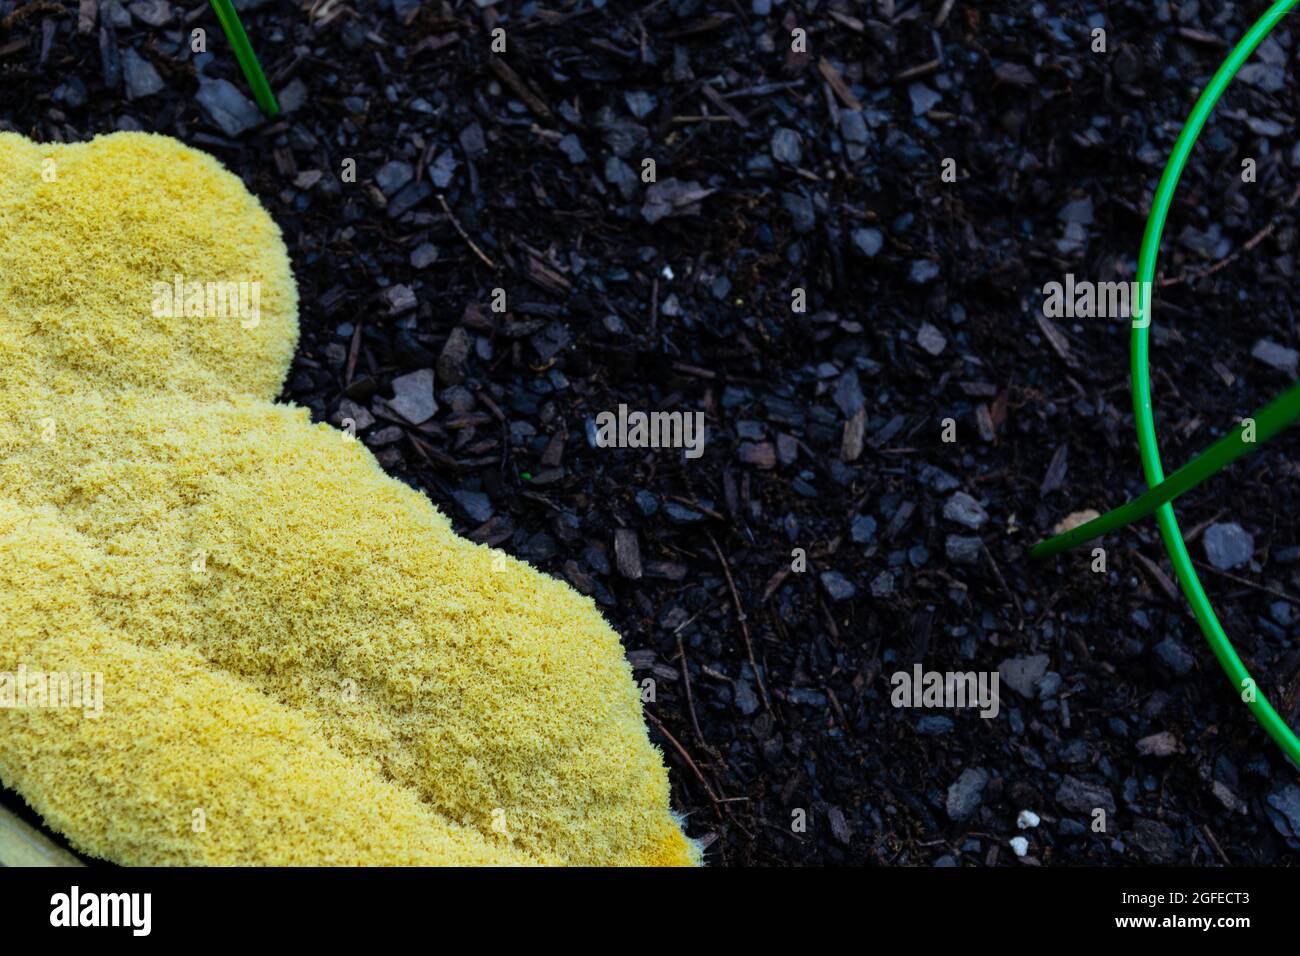 Yellow slime mold Fuligo septica growing in dark mulch beside green tomato cages, creative copy space, horizontal aspect Stock Photo